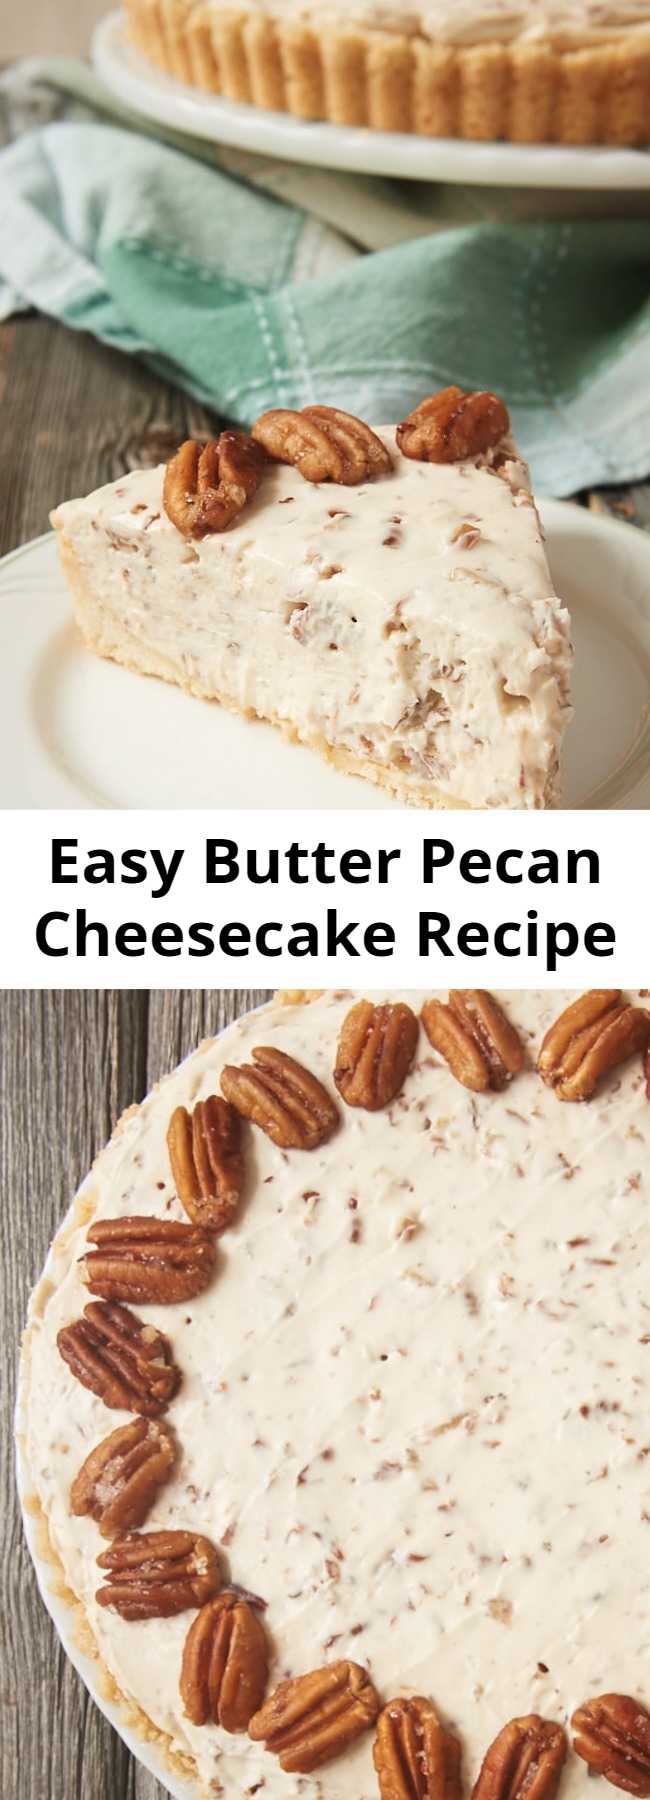 Easy Butter Pecan Cheesecake Recipe - Buttery toasted pecans add big flavor to this Butter Pecan Cheesecake!